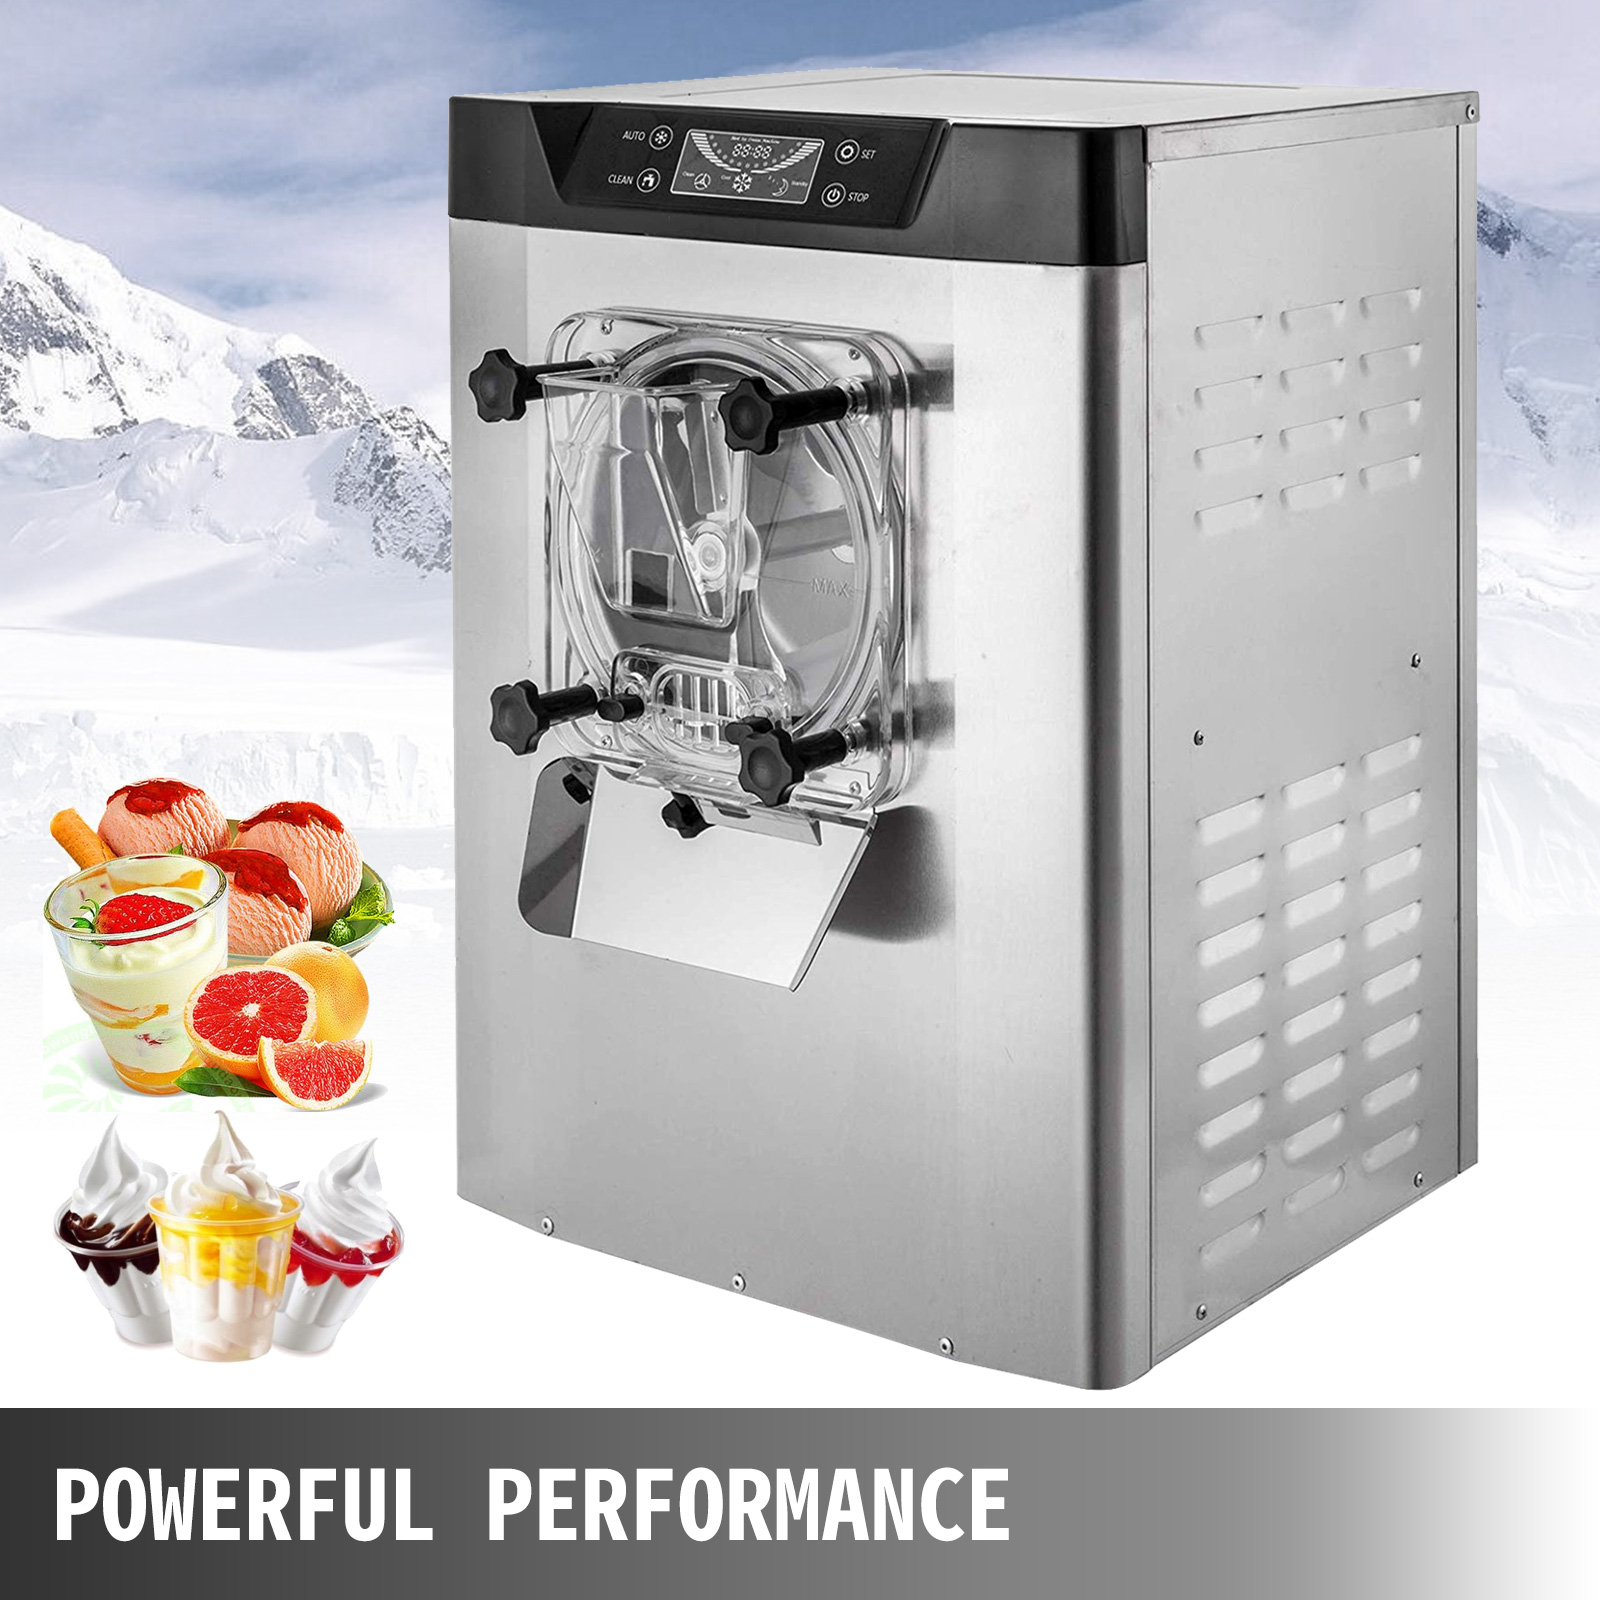 25~32L/H 2000W Auto-Cleaning Commercial Ice Cream Machine Soft